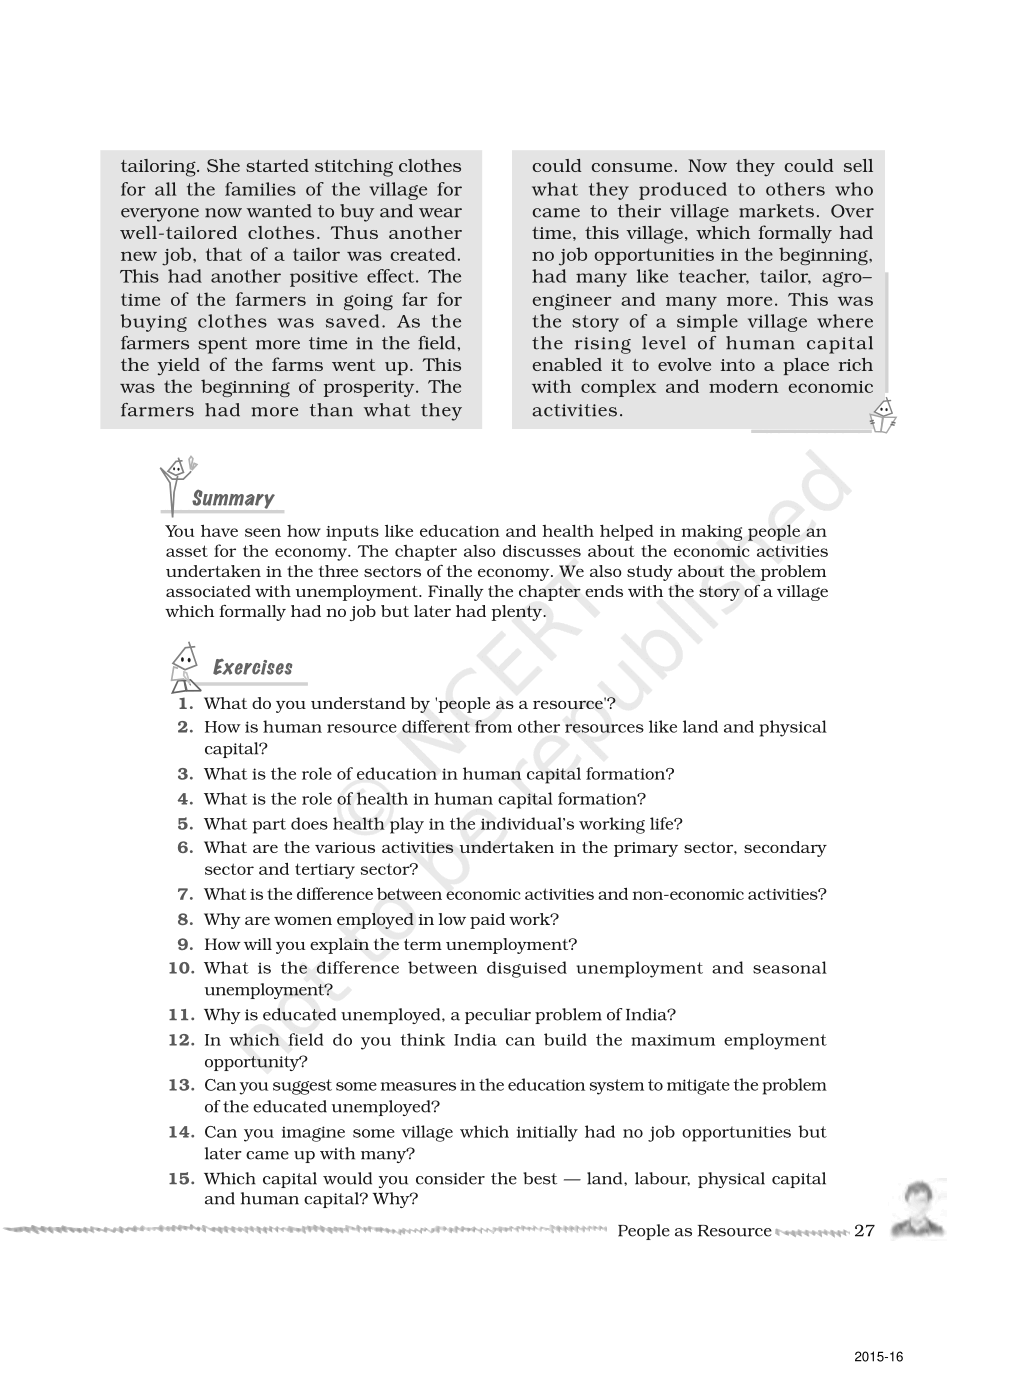 page 12